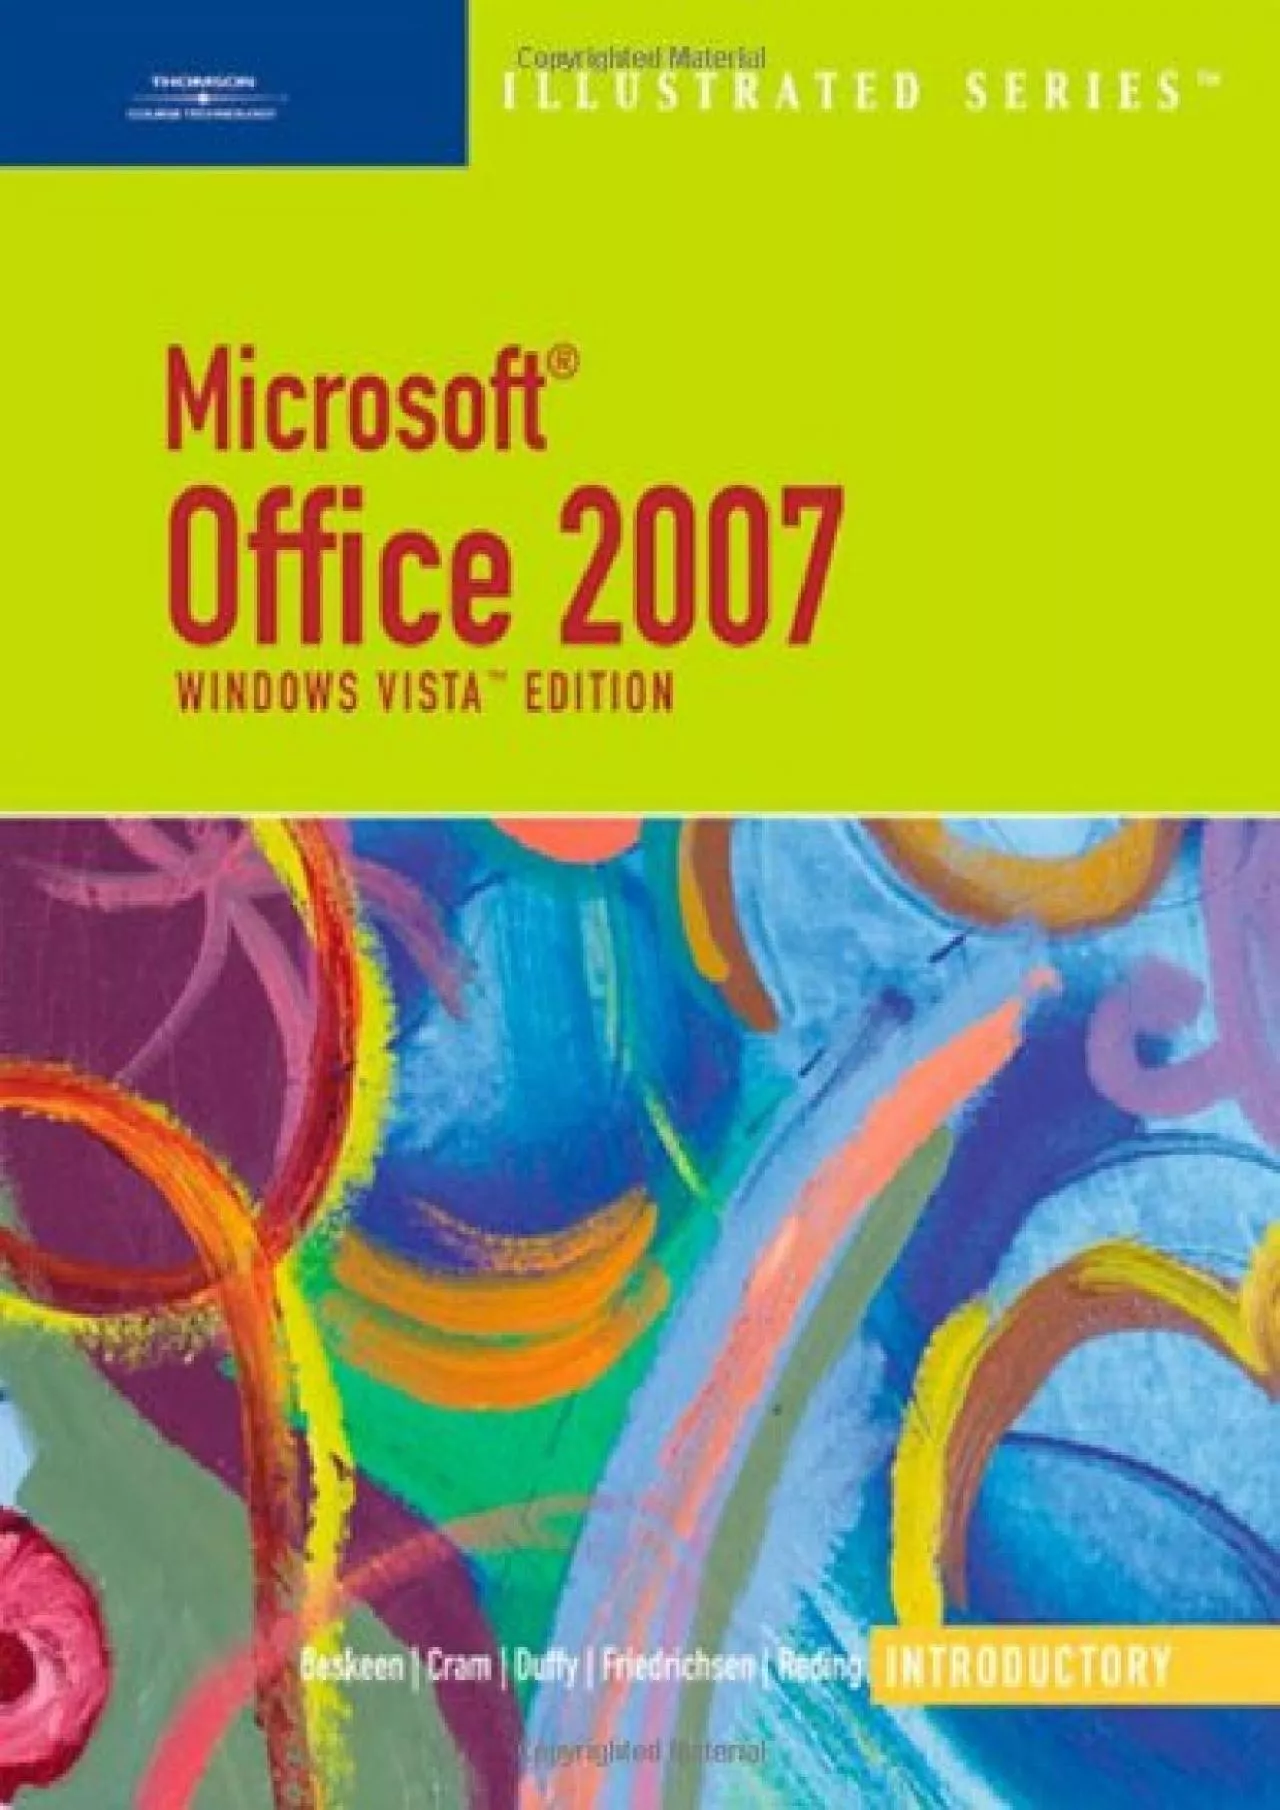 (BOOK)-Microsoft Office 2007 Illustrated Introductory, Windows Vista Edition (Available